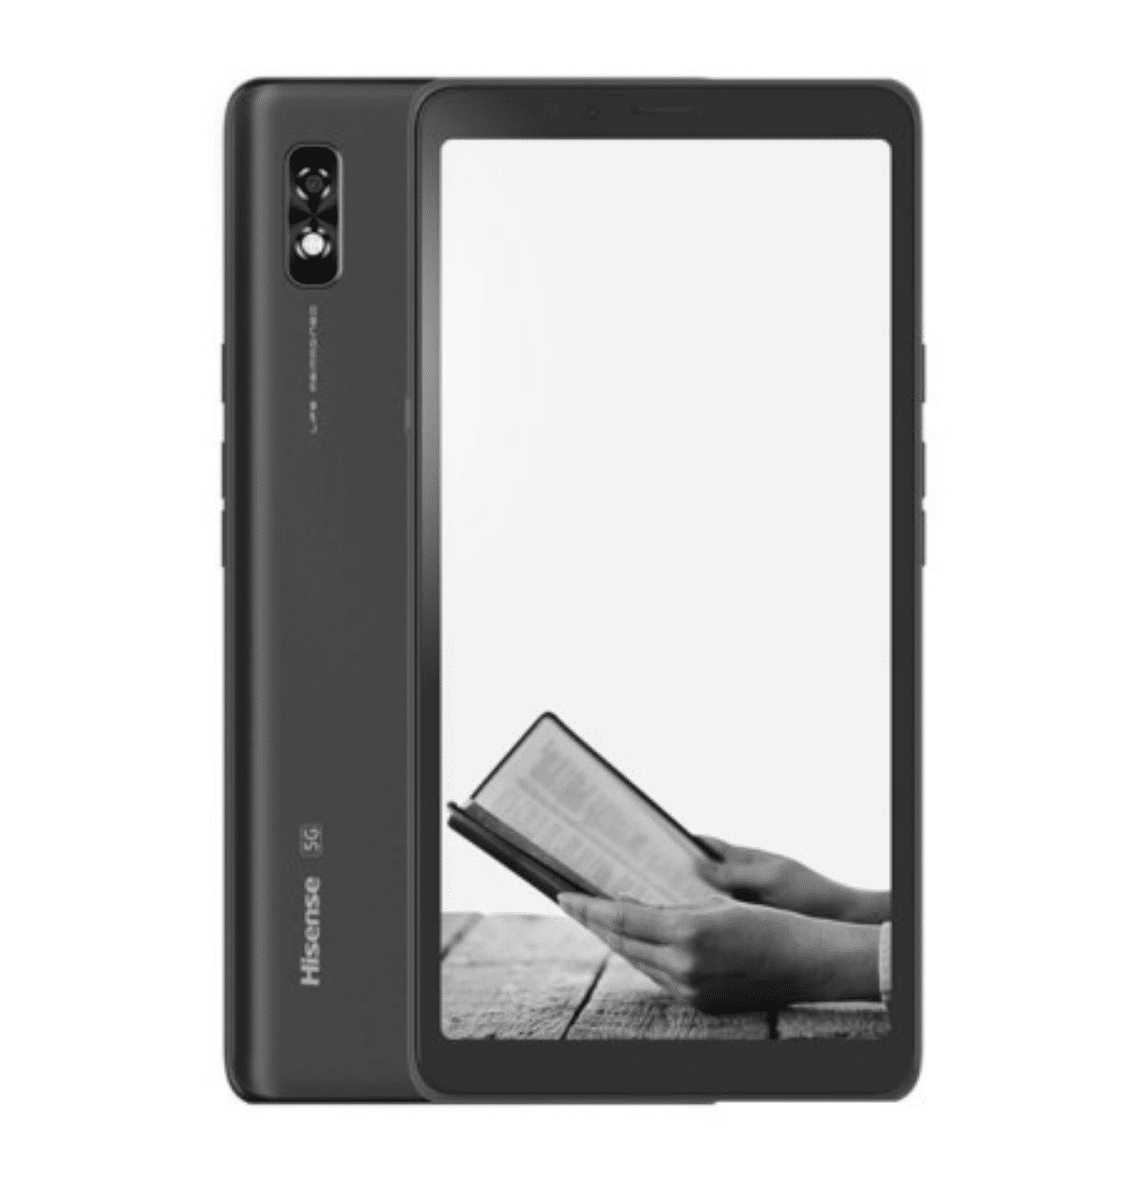 Hisense A7 5G E INK Smartphone with Google Play